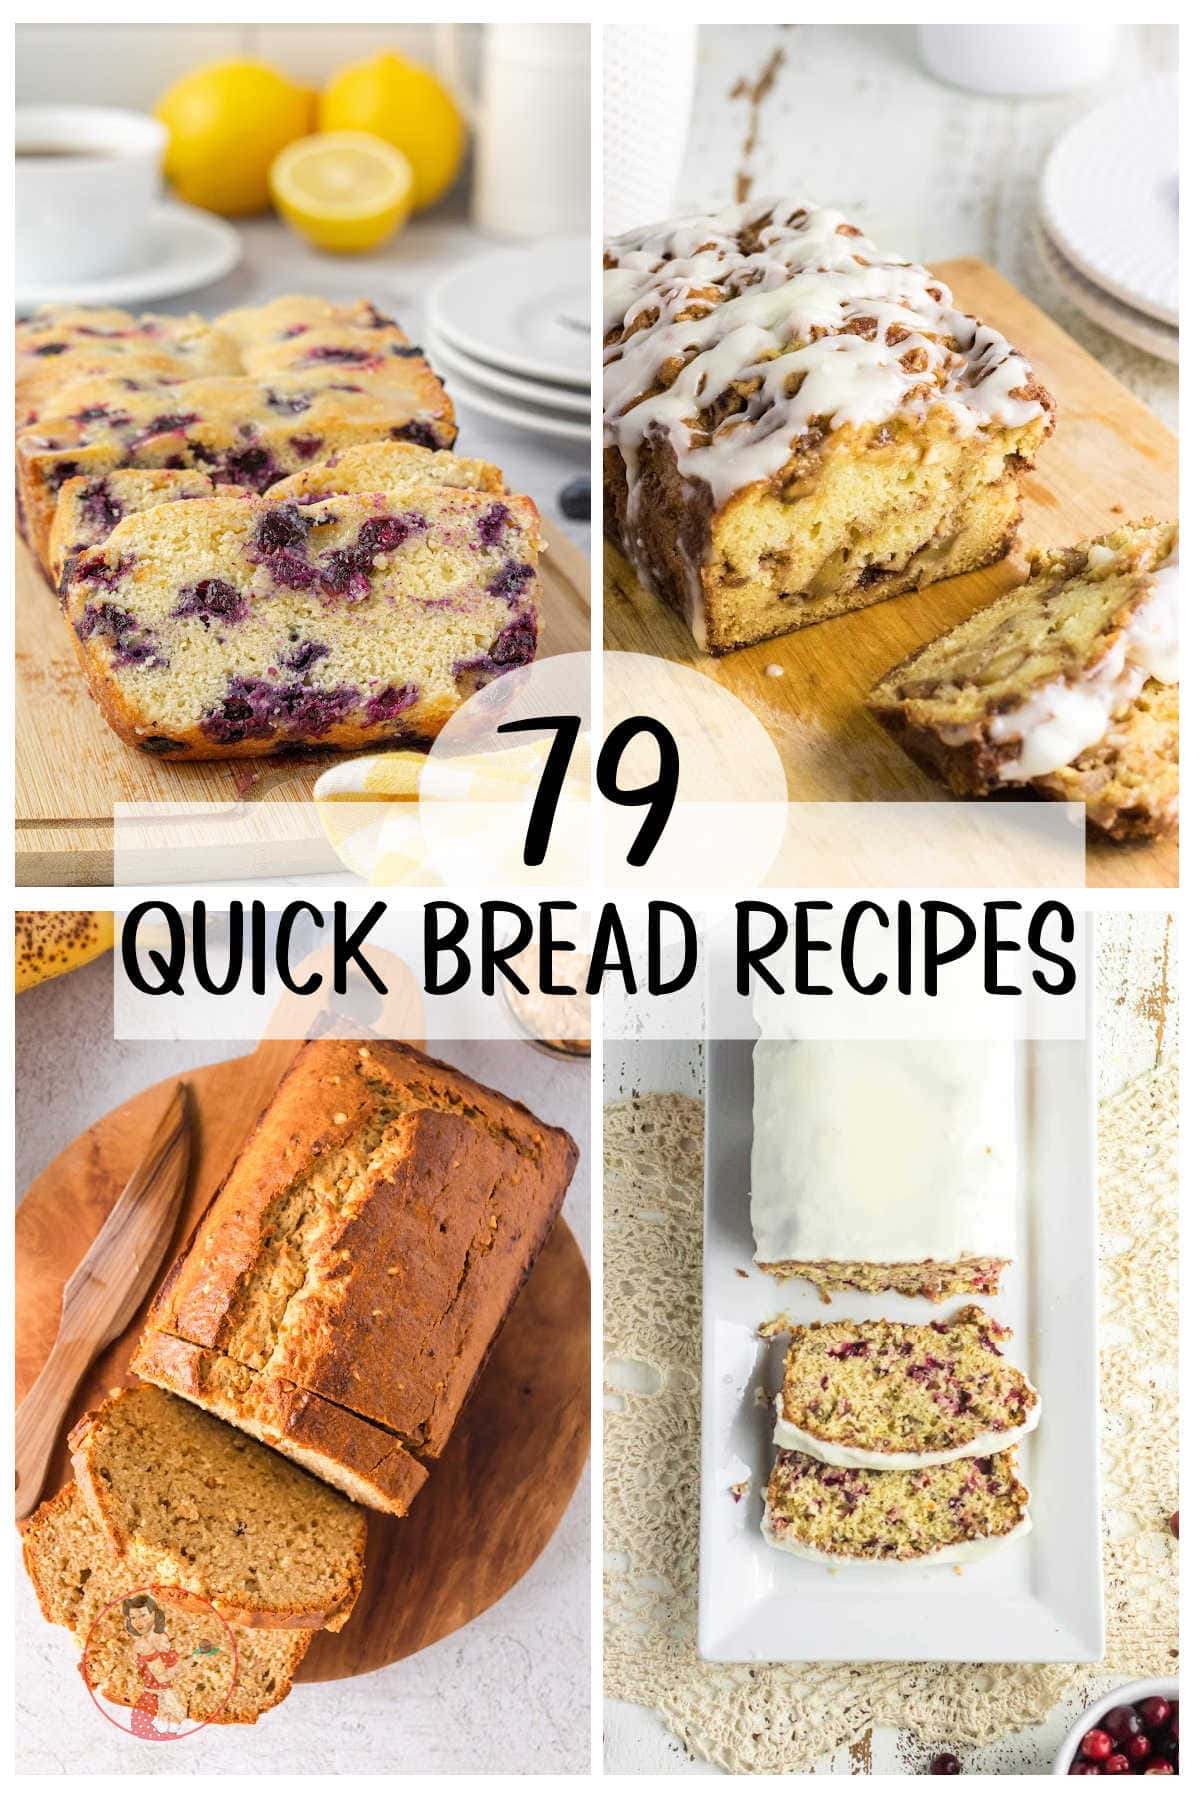 A collage of 4 images of quick breads with title text in the center.